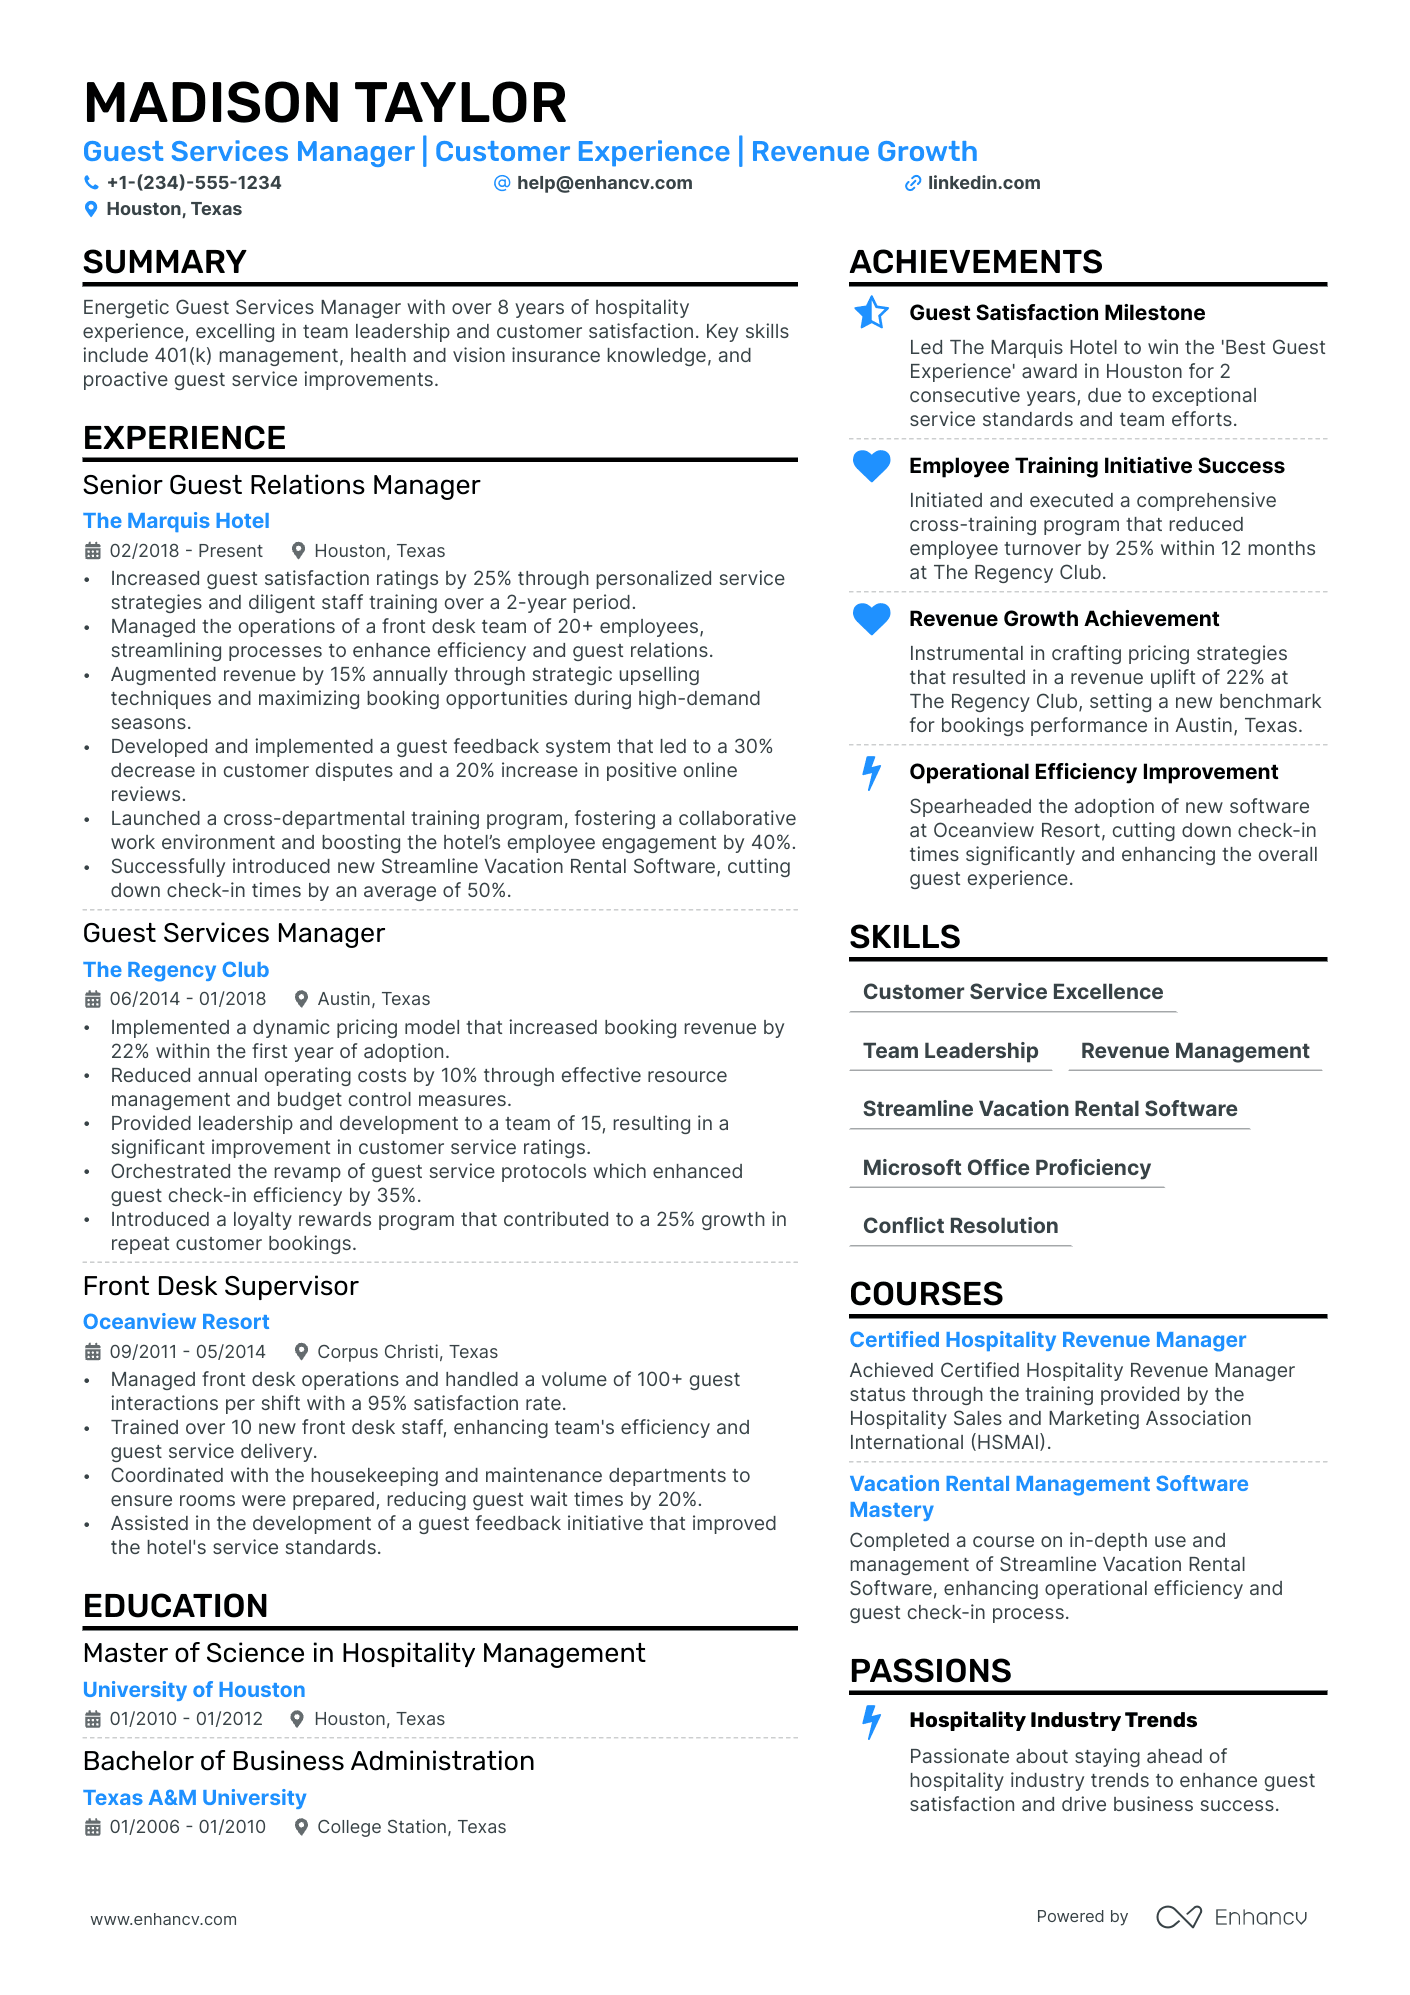 Guest Services Manager resume example